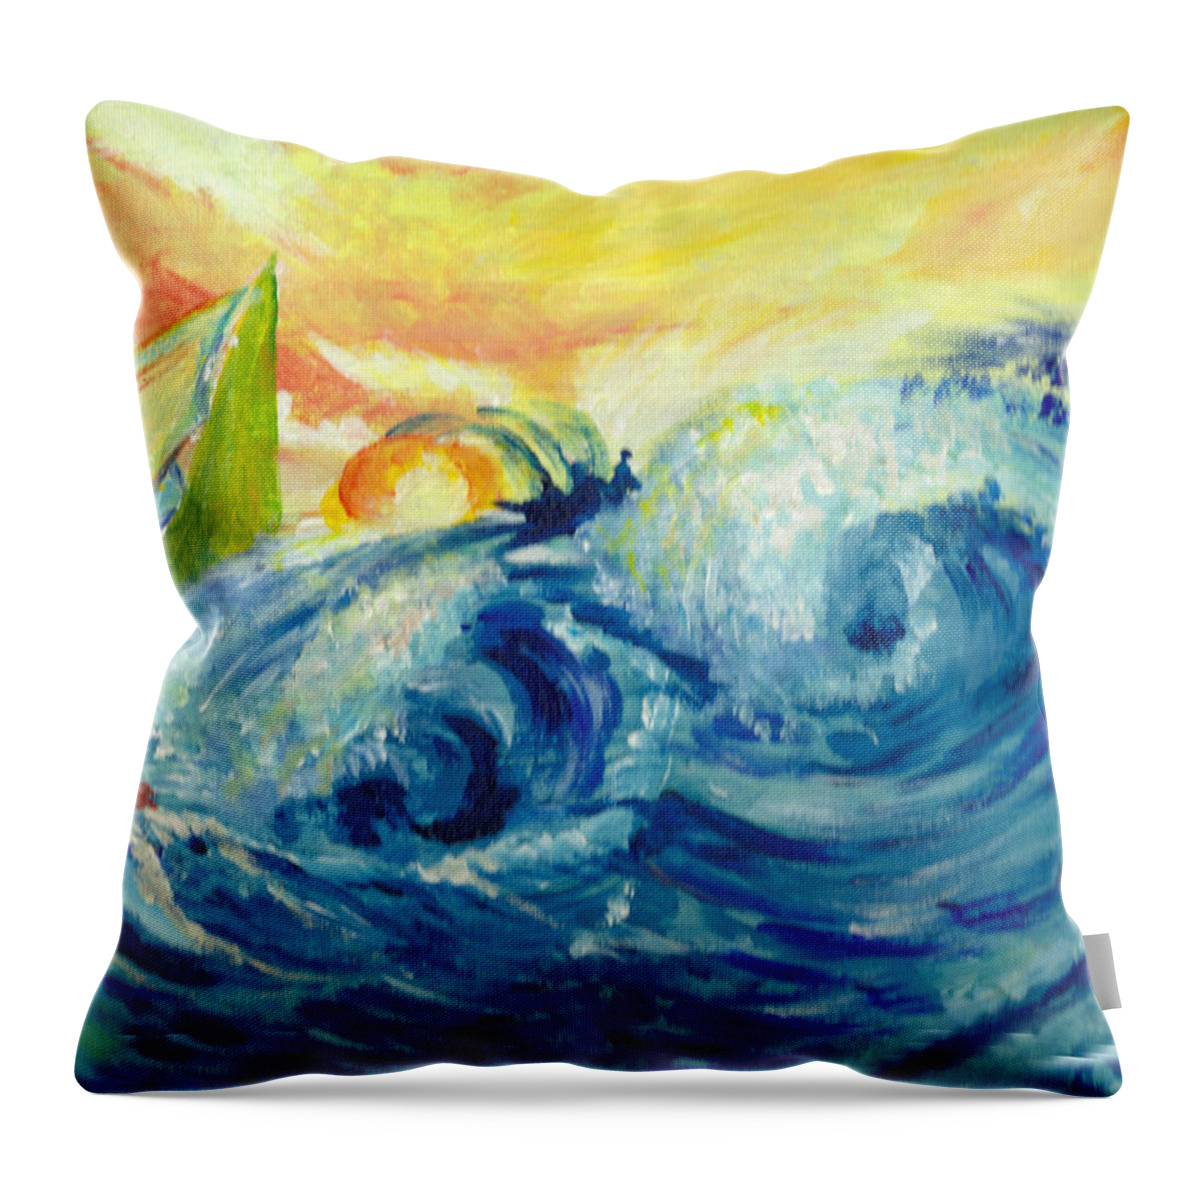 Seascape Throw Pillow featuring the painting High Tide by Sarabjit Singh